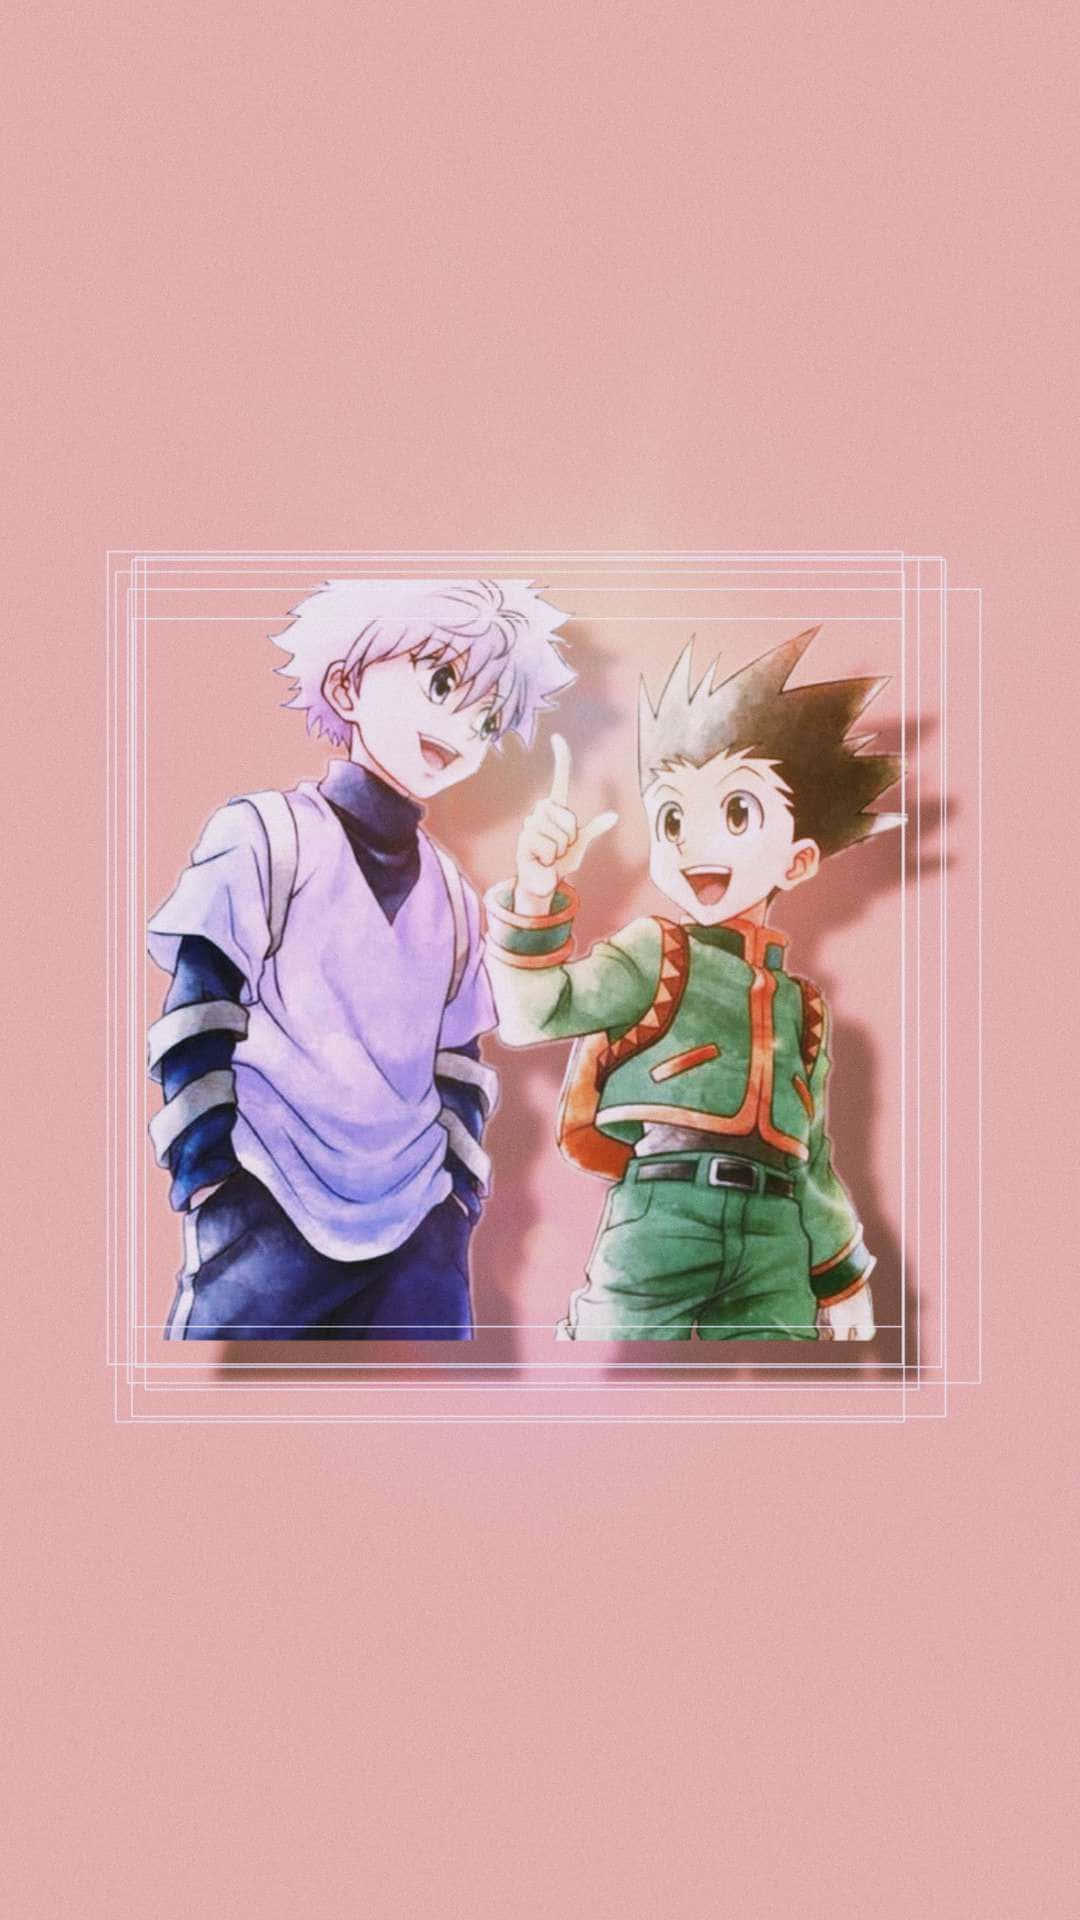 "The adventures of Gon and his friends continue!" Wallpaper